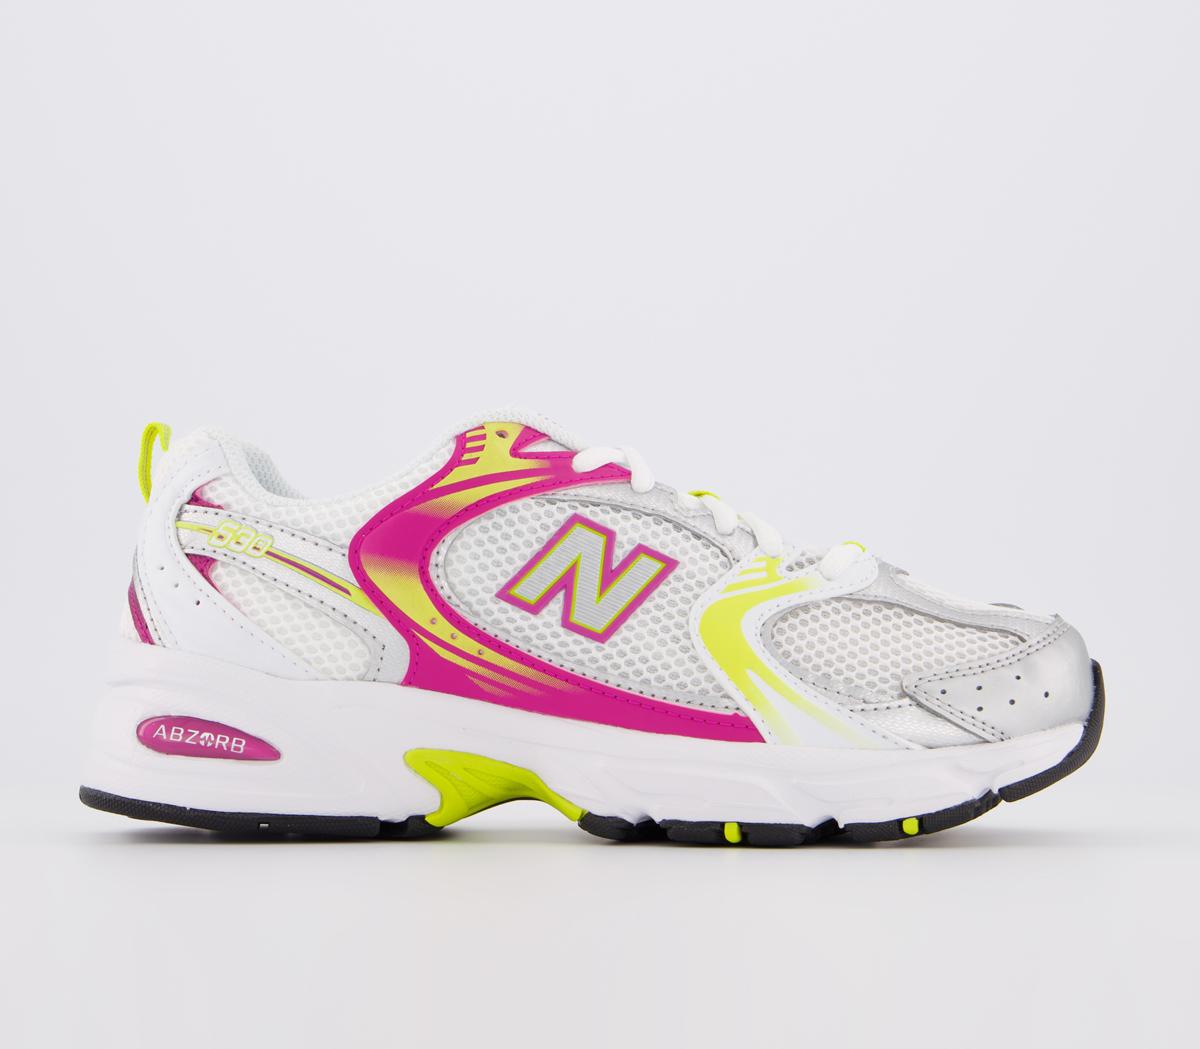 new balance 530 trainers in pink